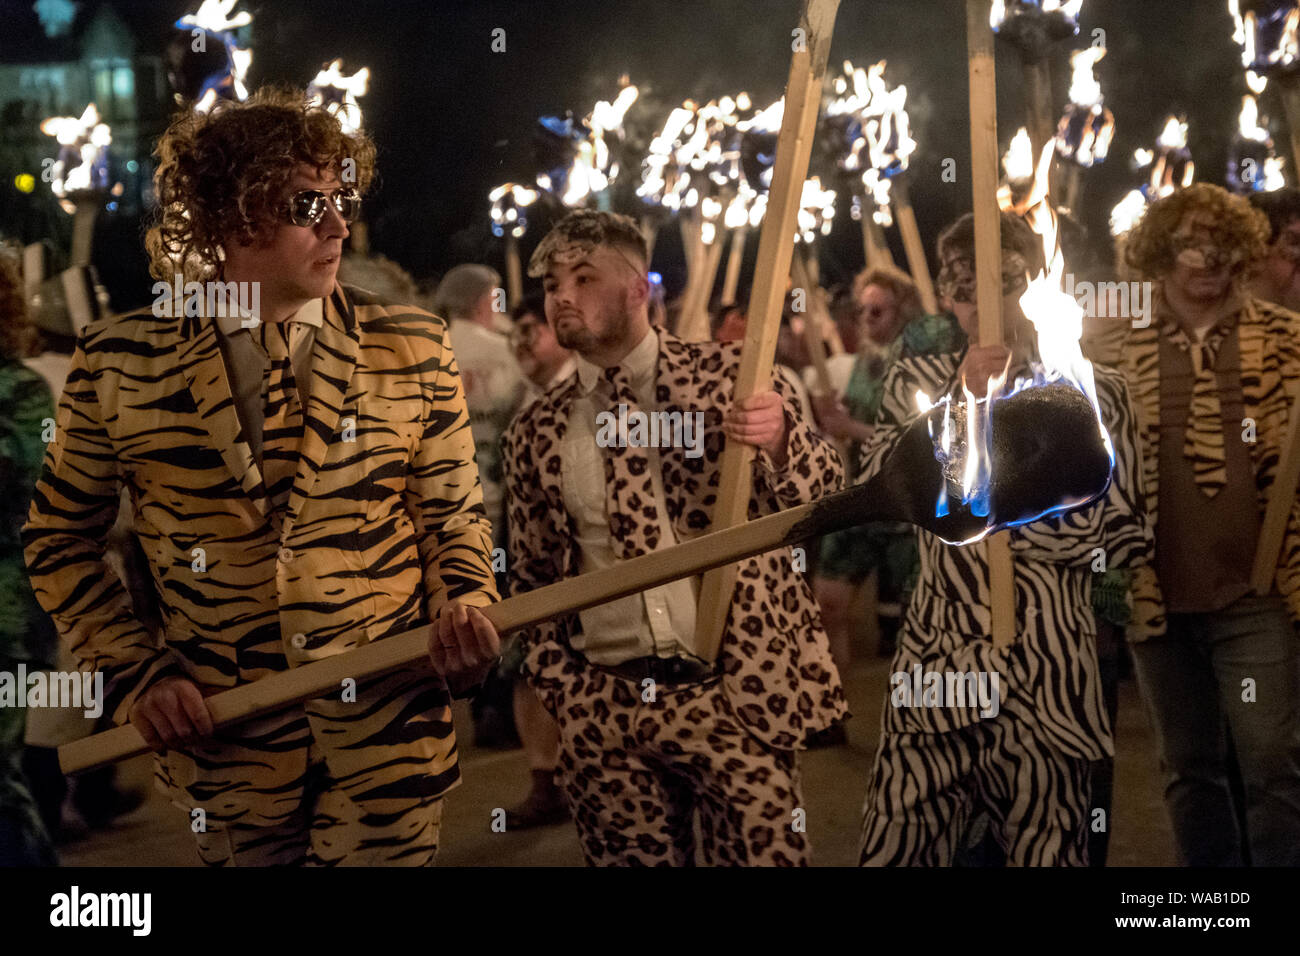 Men in animal print costumes carry fire torches as part of the 2019 Up Helly Aa night procession in Lerwick, Shetland Stock Photo